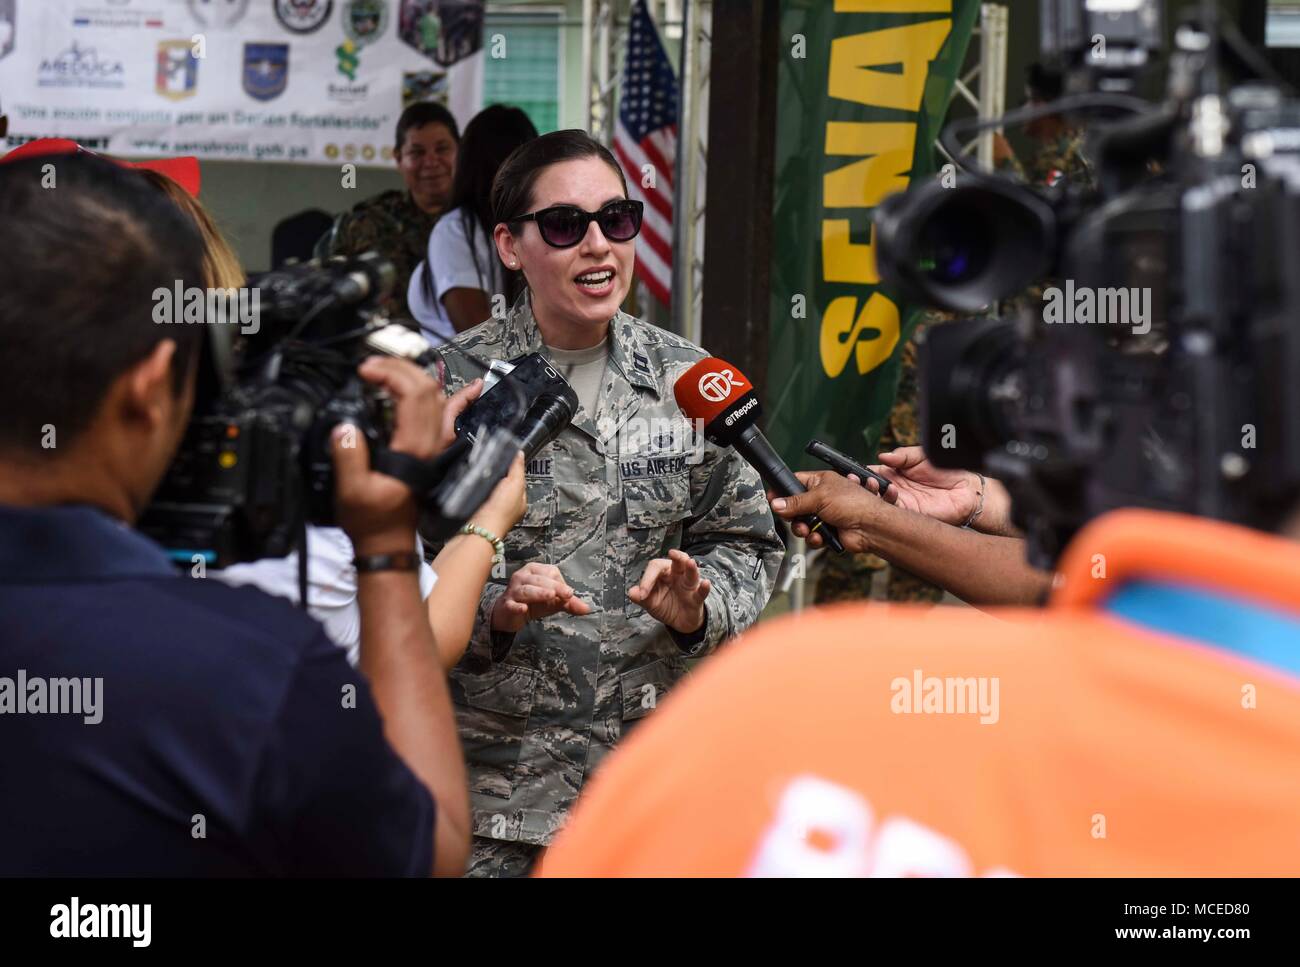 U.S. Air Force Capt. Rosimar Varela-Gradaille, 346th Air Expeditionary Group legal advisor, who is deployed from Eglin Air Force Base, Fla., speaks to local media during the opening ceremony of Exercise New Horizons 2018, April 11, 2018 in Meteti, Panama. The joint-service exercise will provide readiness training to U.S. military members, while also benefiting local communities throughout the country. During the exercise, U.S. military members will build three schools, one community center and a women’s health ward in the Meteti area. They will also work closely with Panamanian health provider Stock Photo